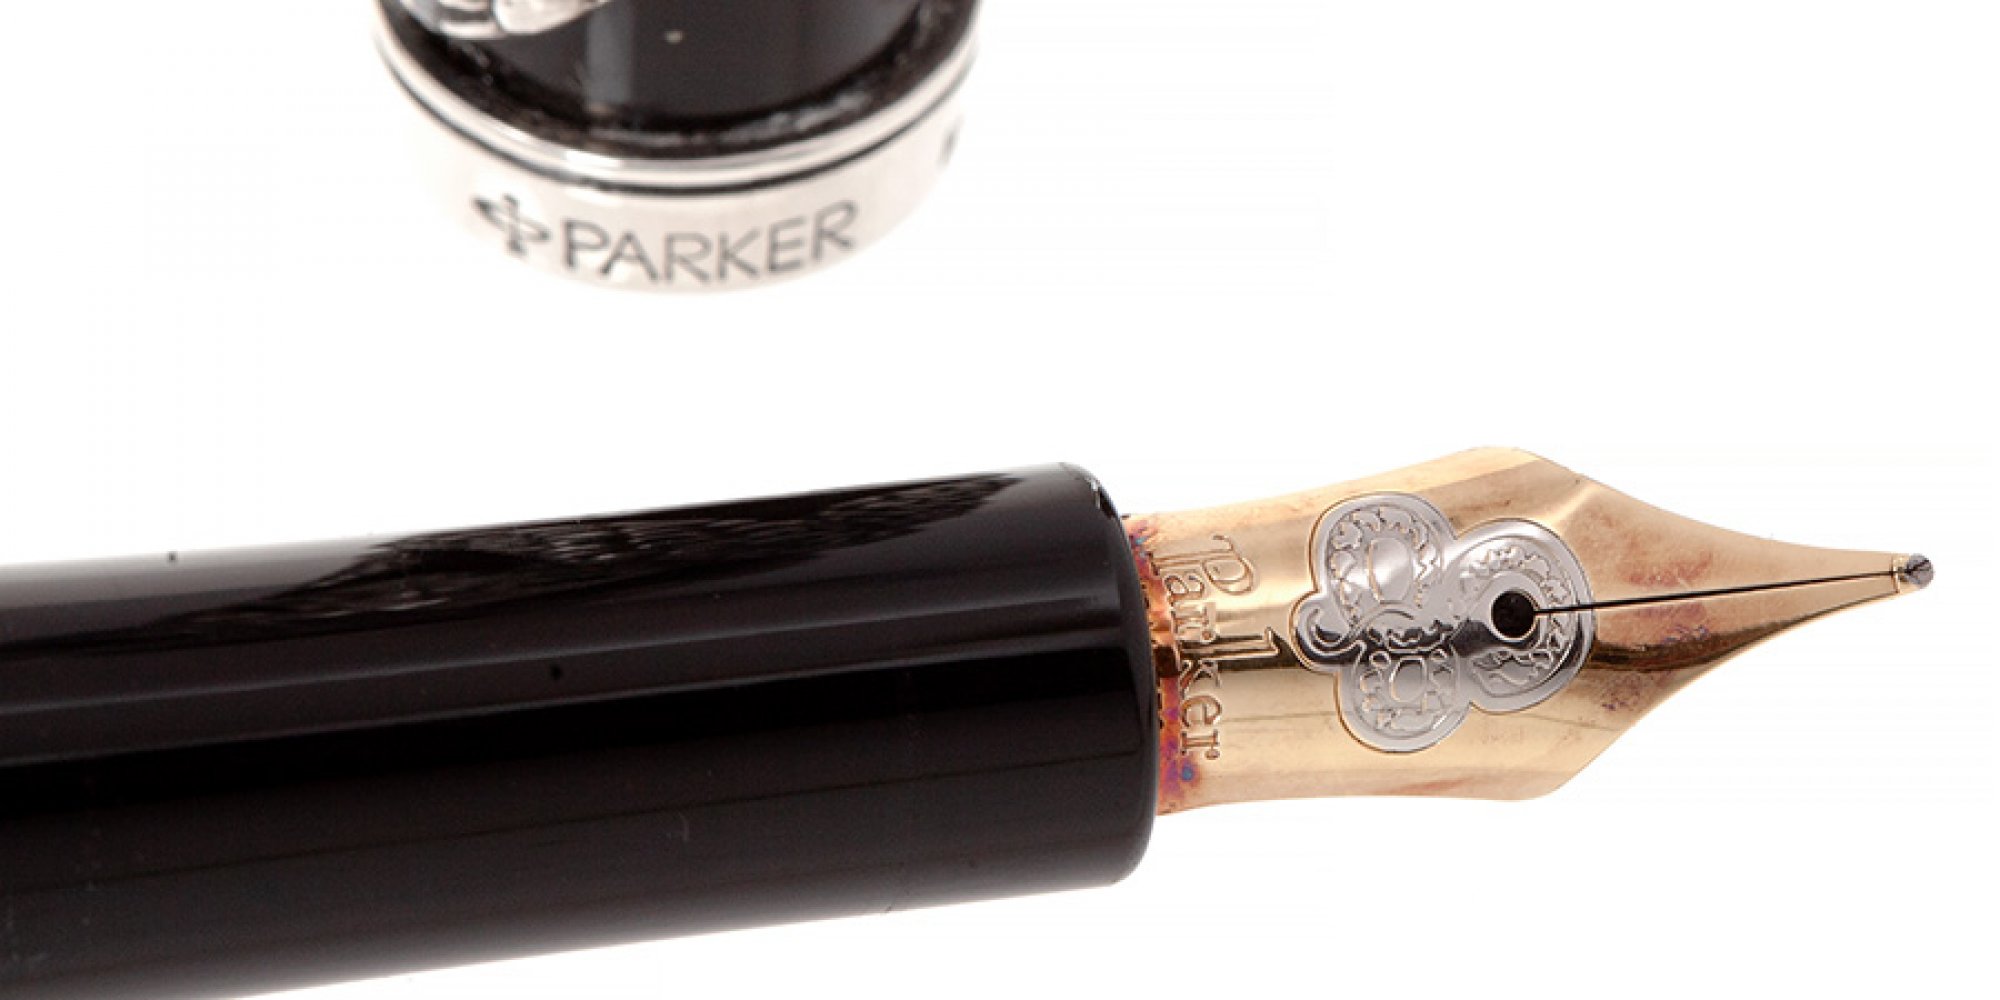 PARKER SNAKE FOUNTAIN PEN, 1997.Black resin barrel with emeralds and silver.Nib in 18 kts. gold - Image 3 of 3